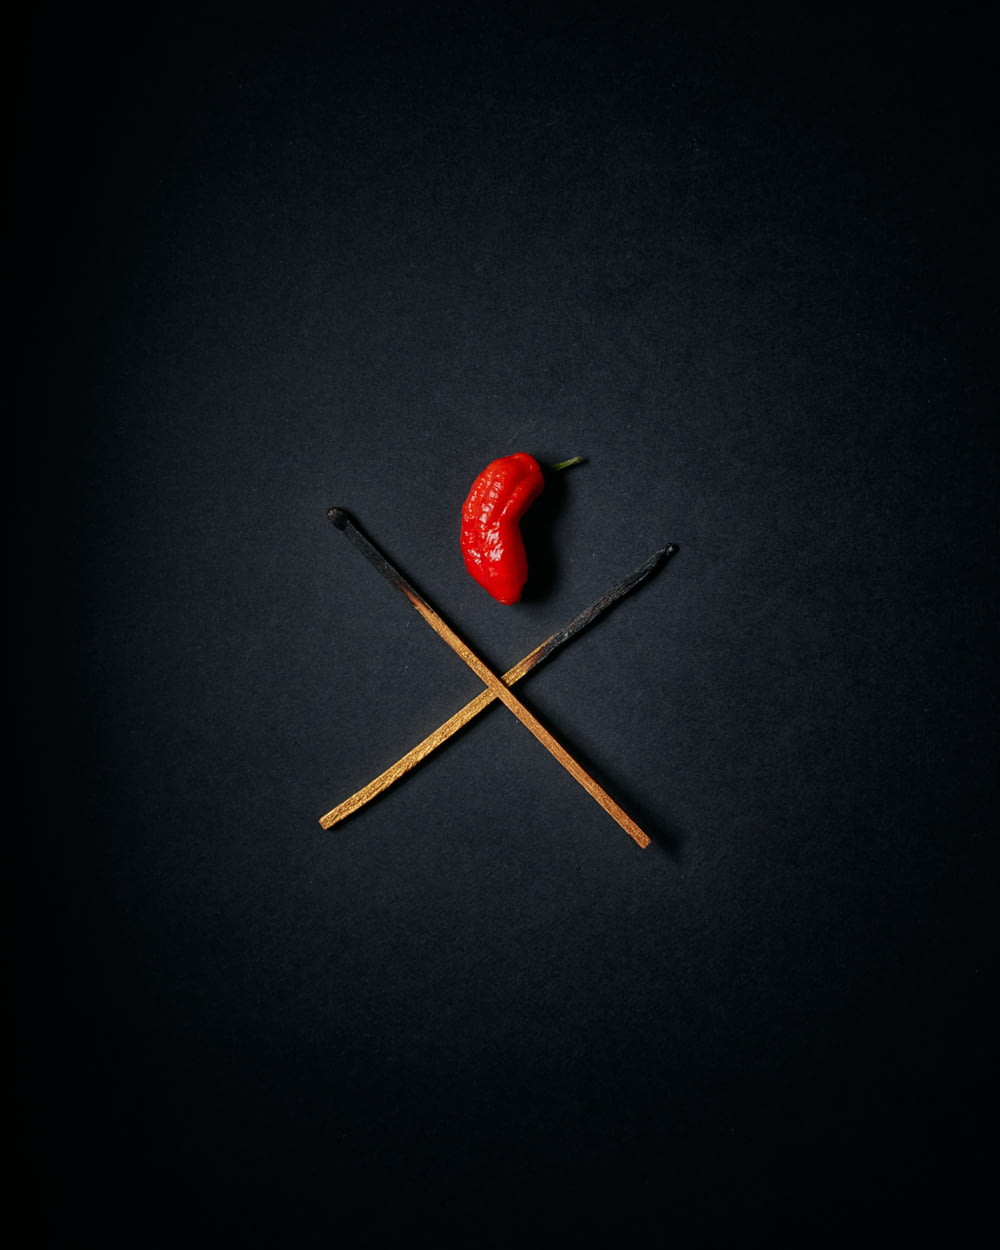 red strawberry on black surface